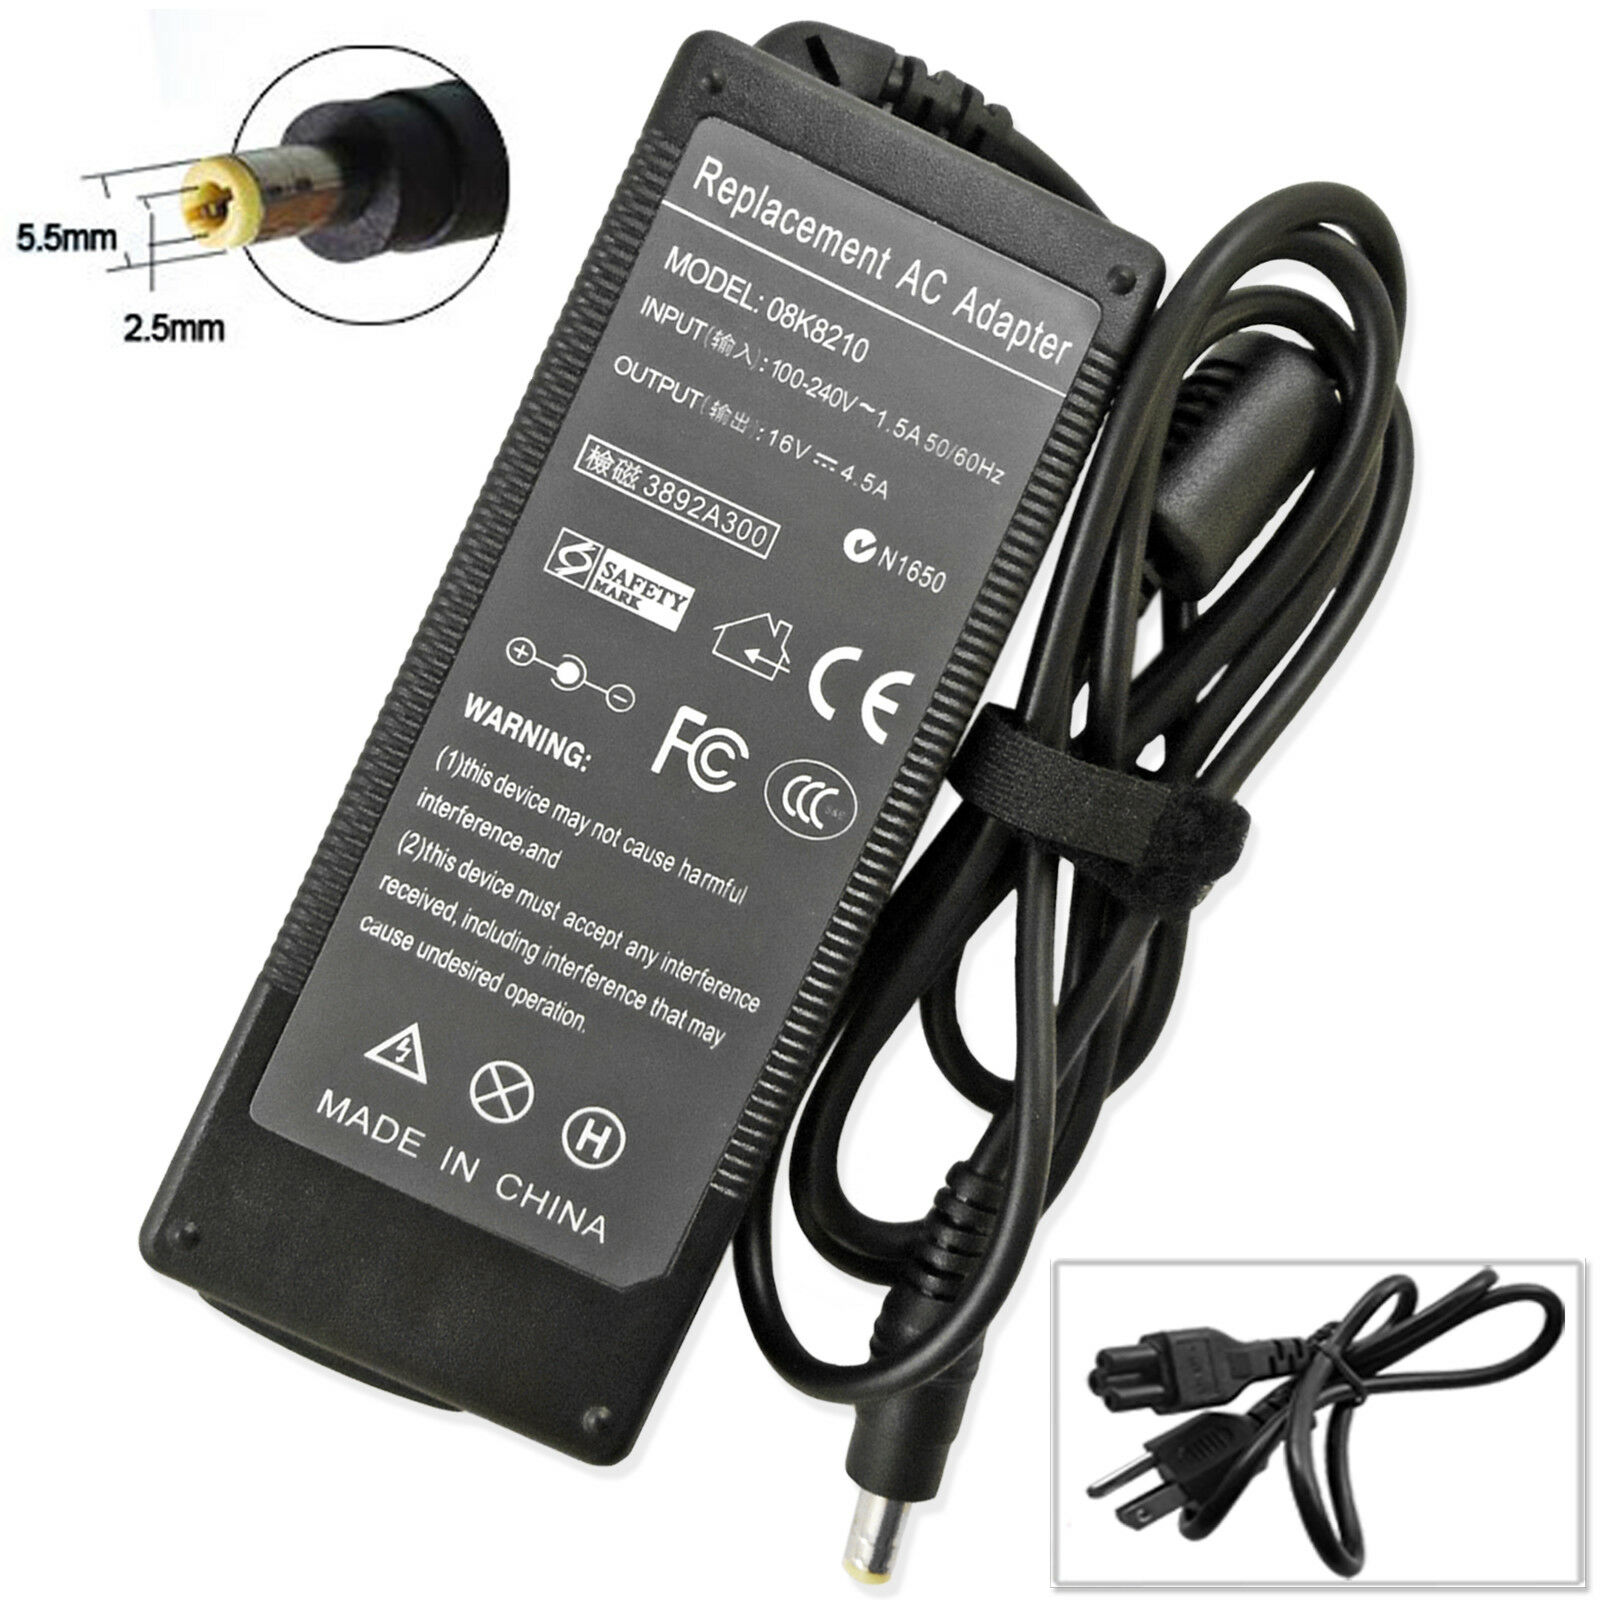 AC Adapter Charger For Panasonic Toughbook CF-19 CF-31 CF-52 CF-53 Power & Cord